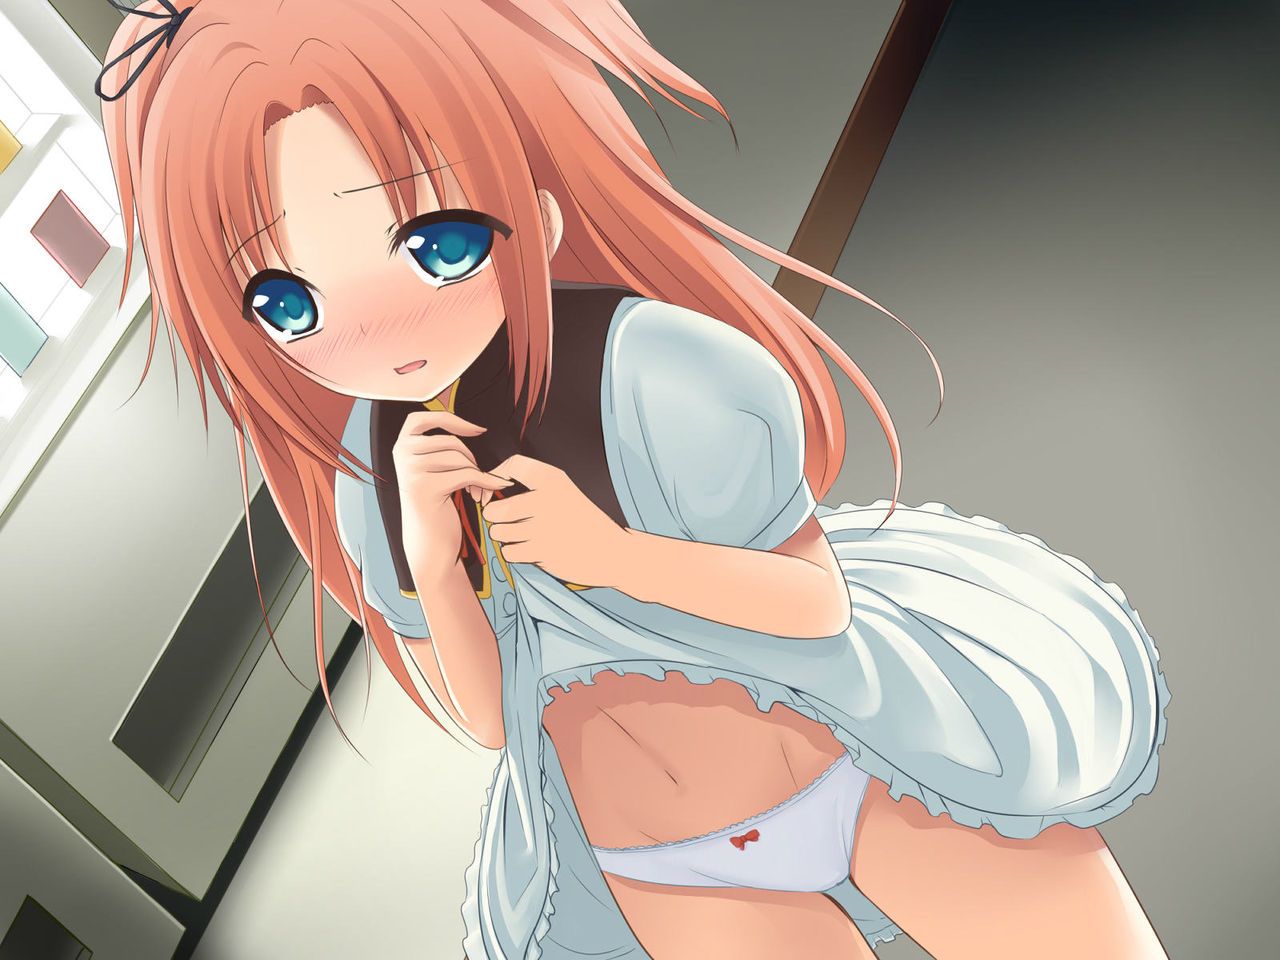 [Taku me up beautiful girl] skirt up and shy look is the best! The image that I want to raise of shame! 28